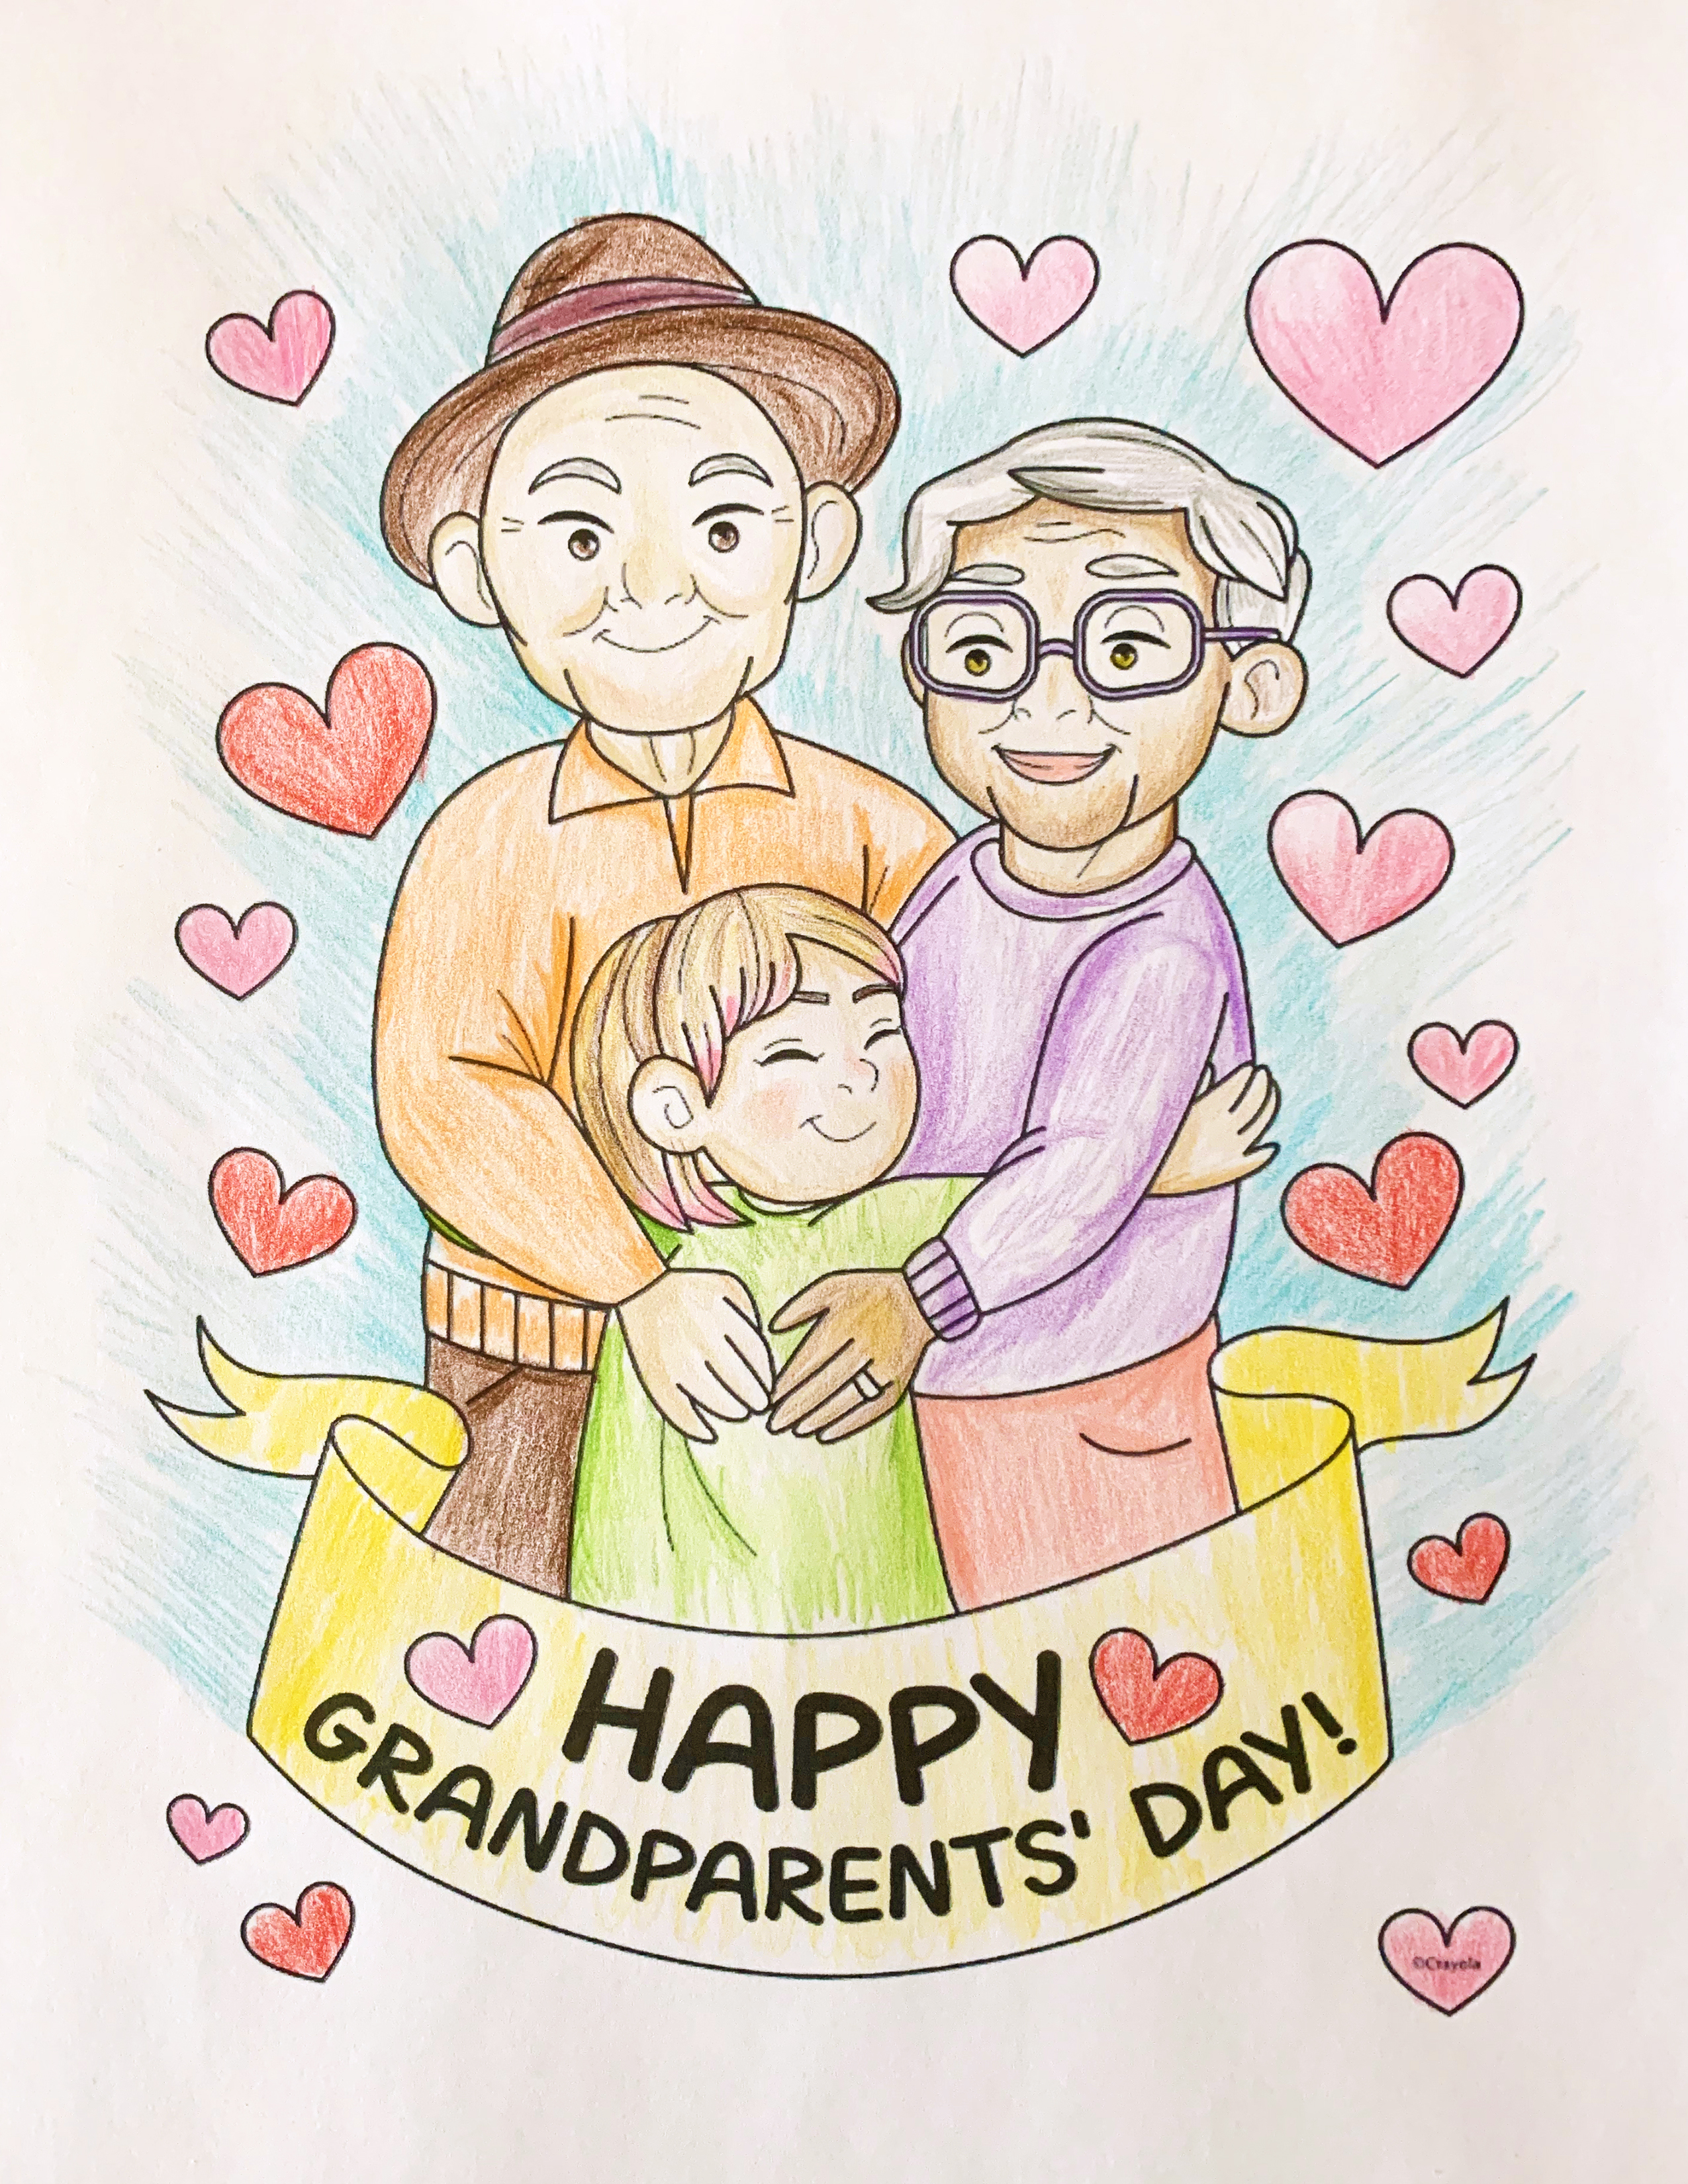 Grandparents Day Tag Image